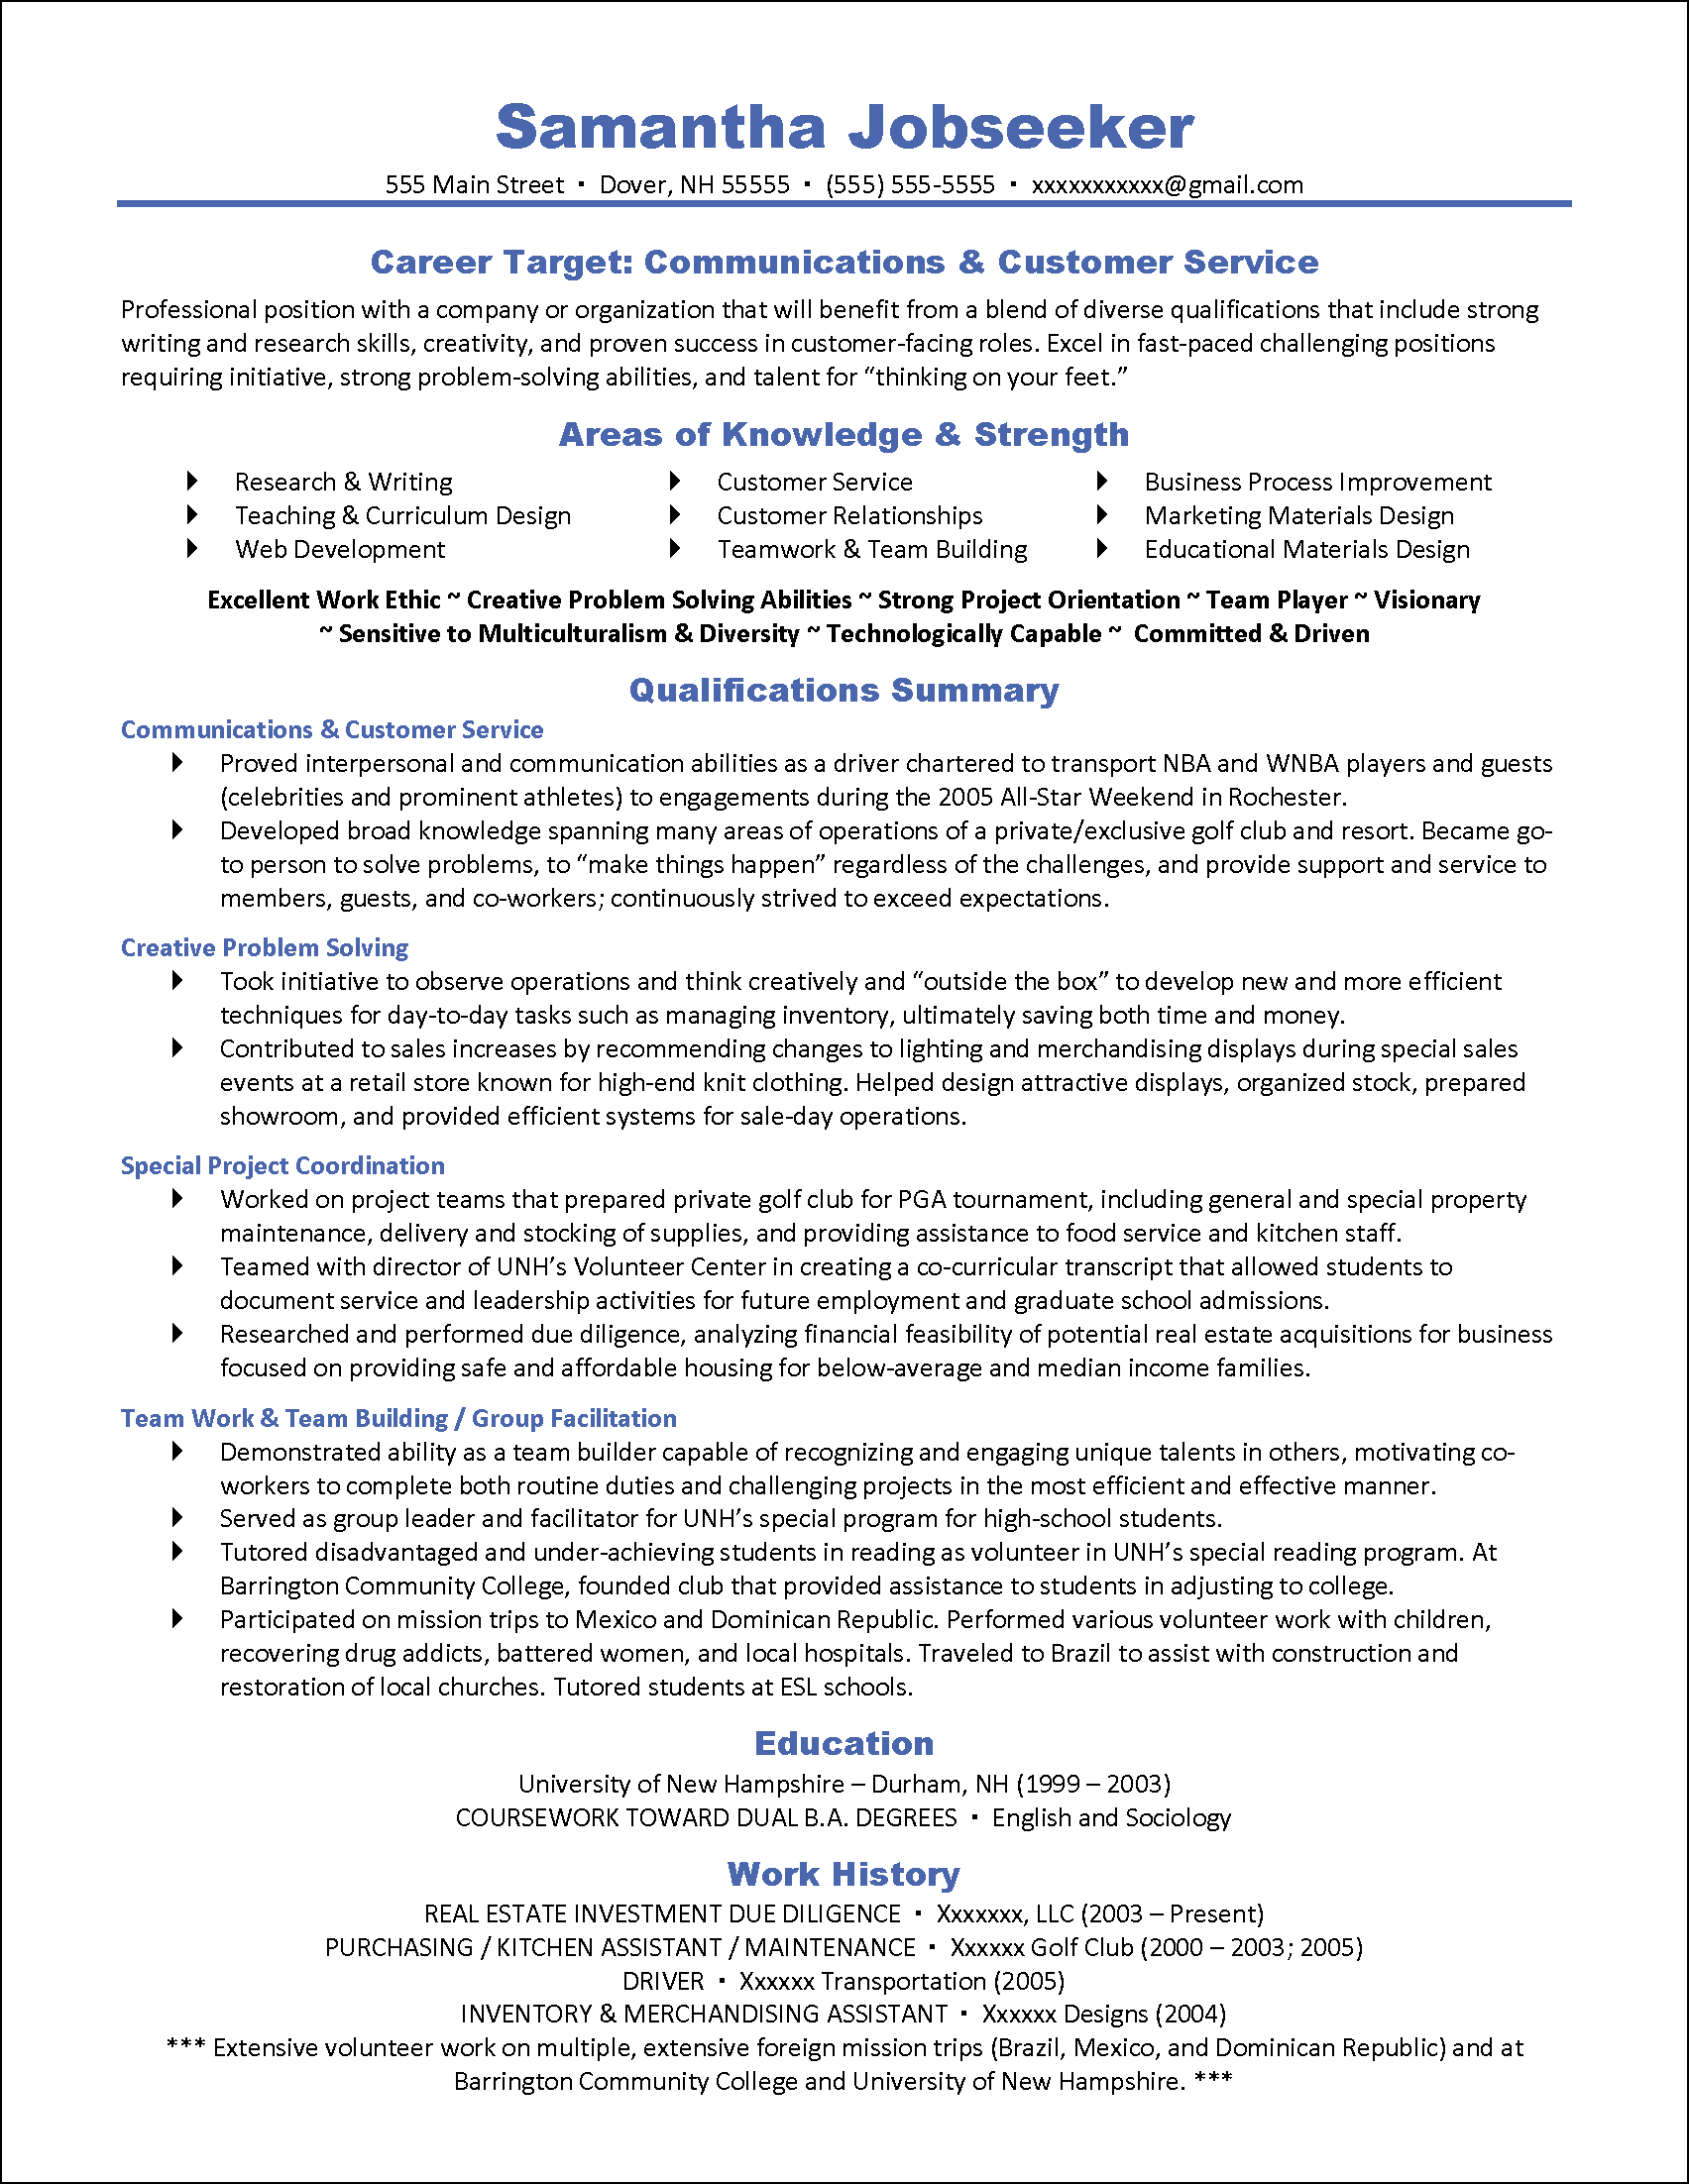 Example Targeted Resume for Communications